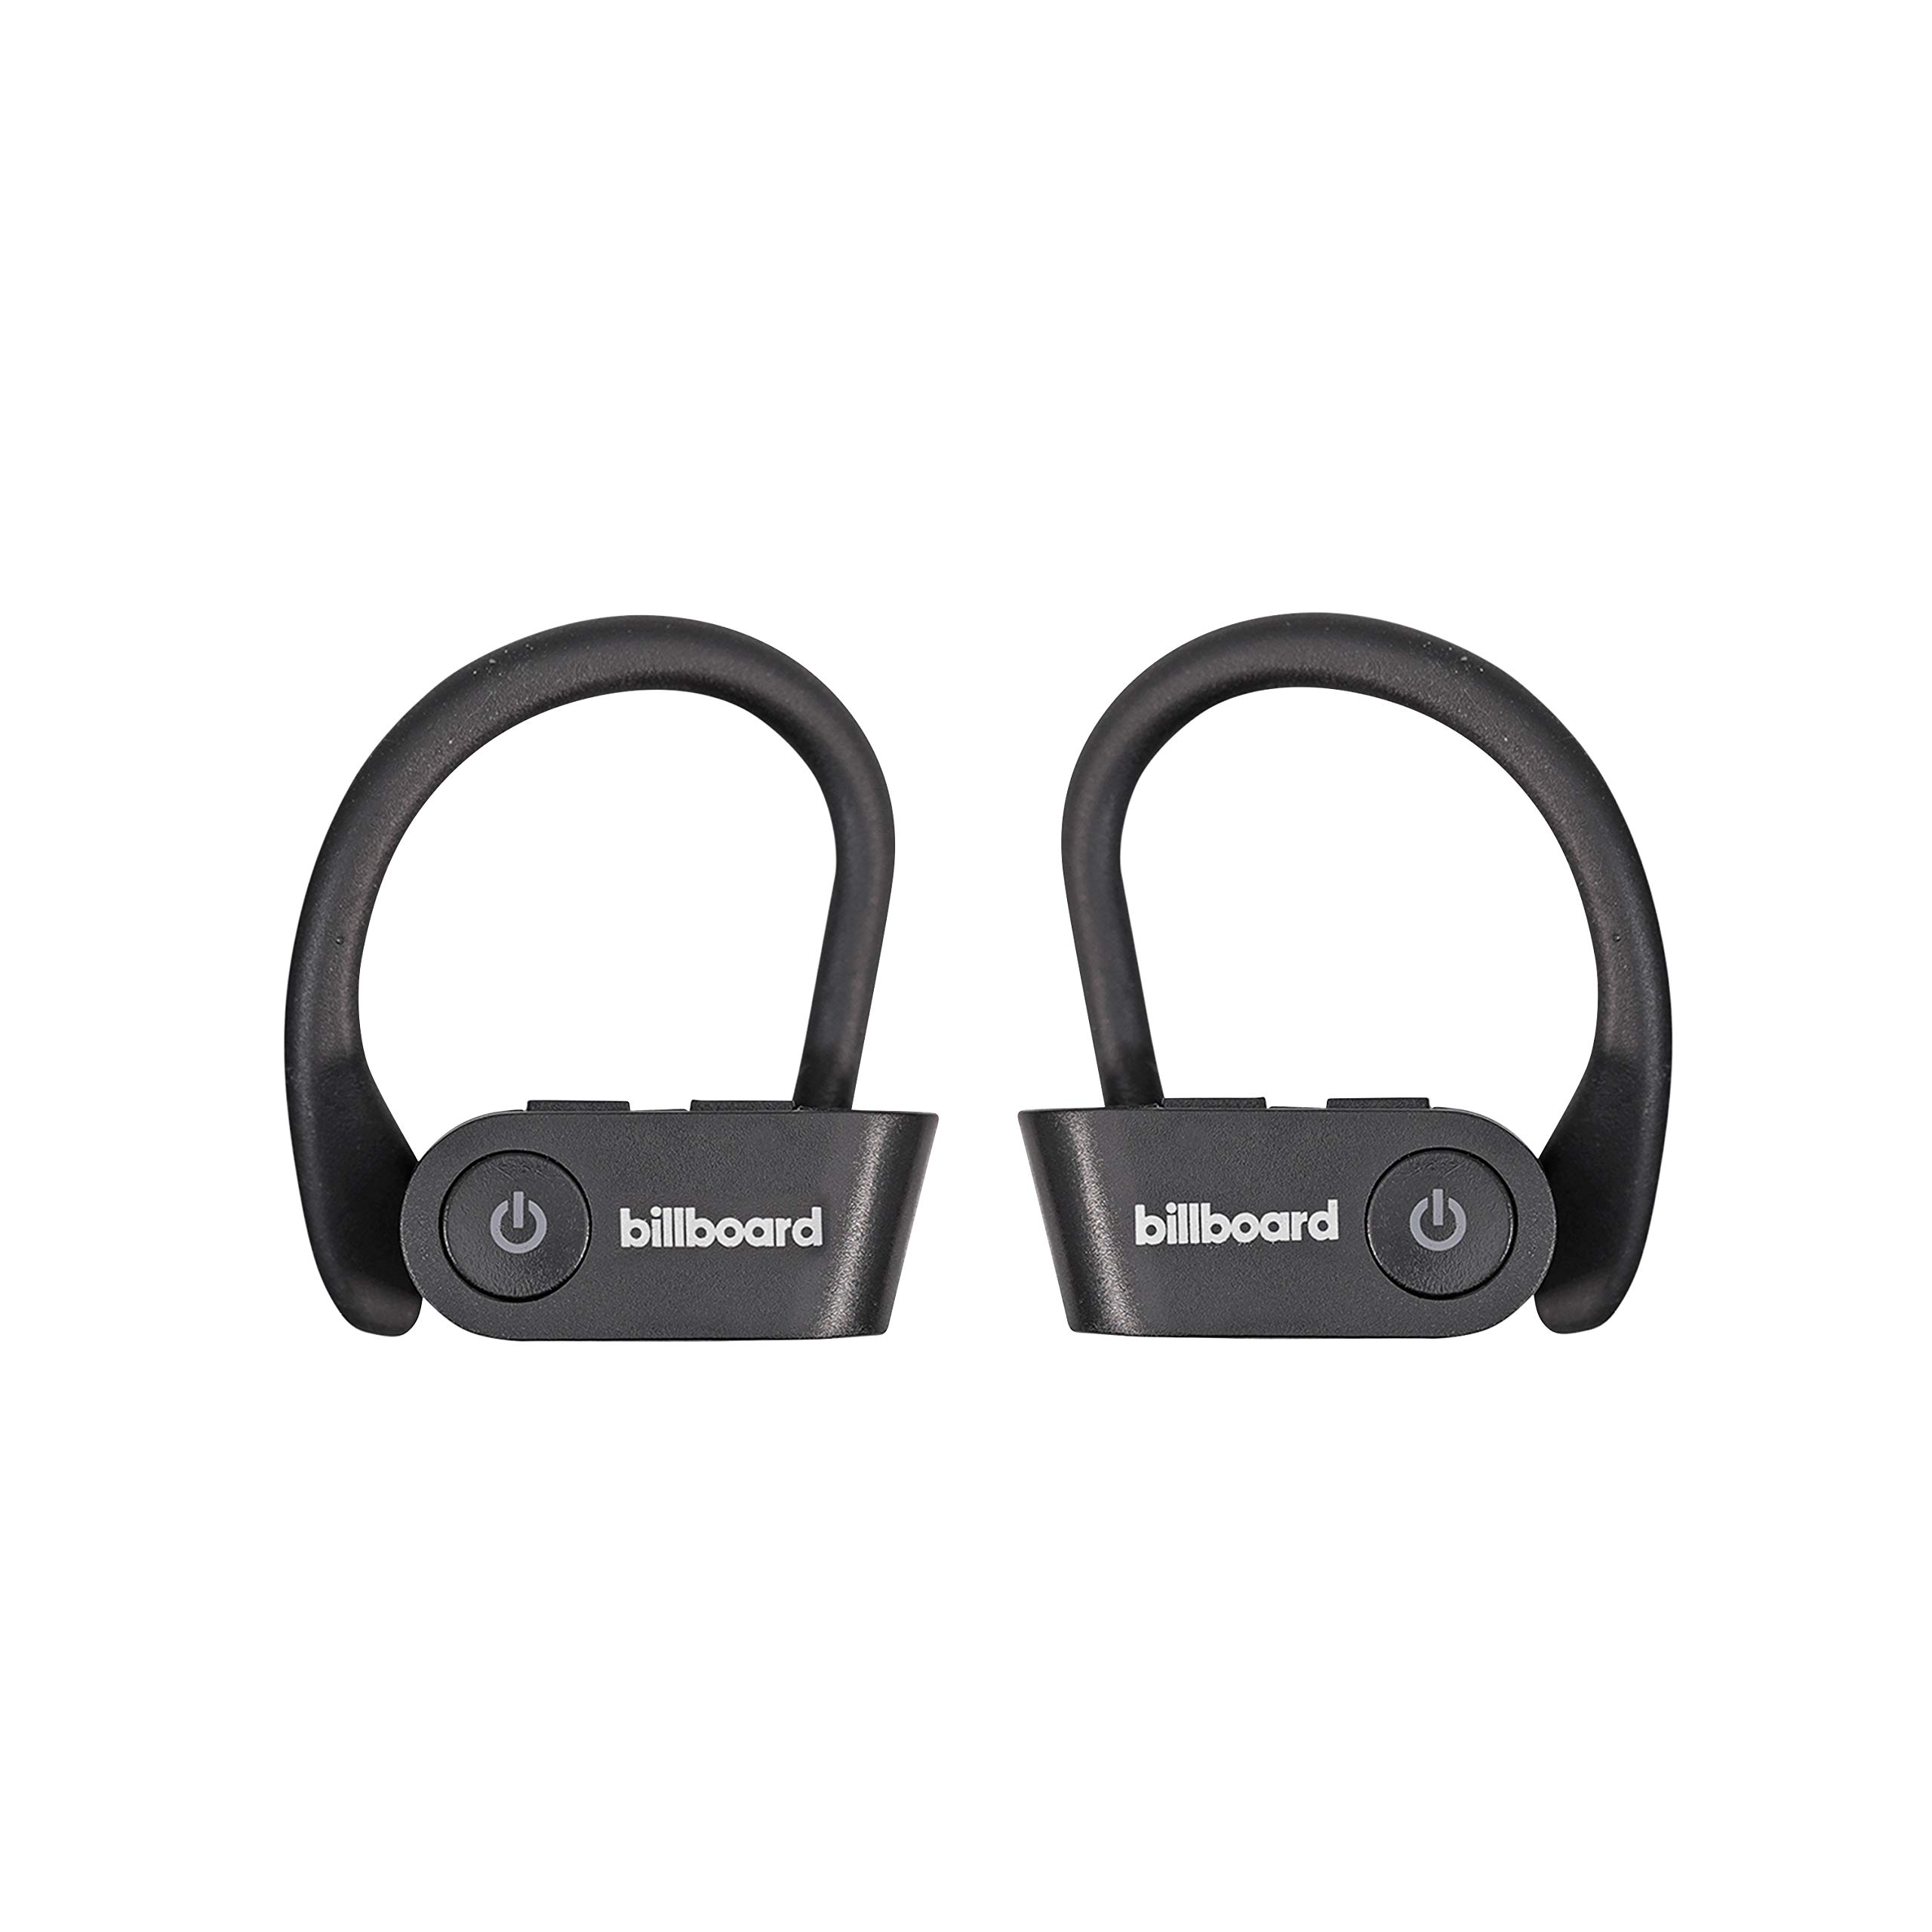 Connecting Billboard Wireless Earbuds: A Quick Guide